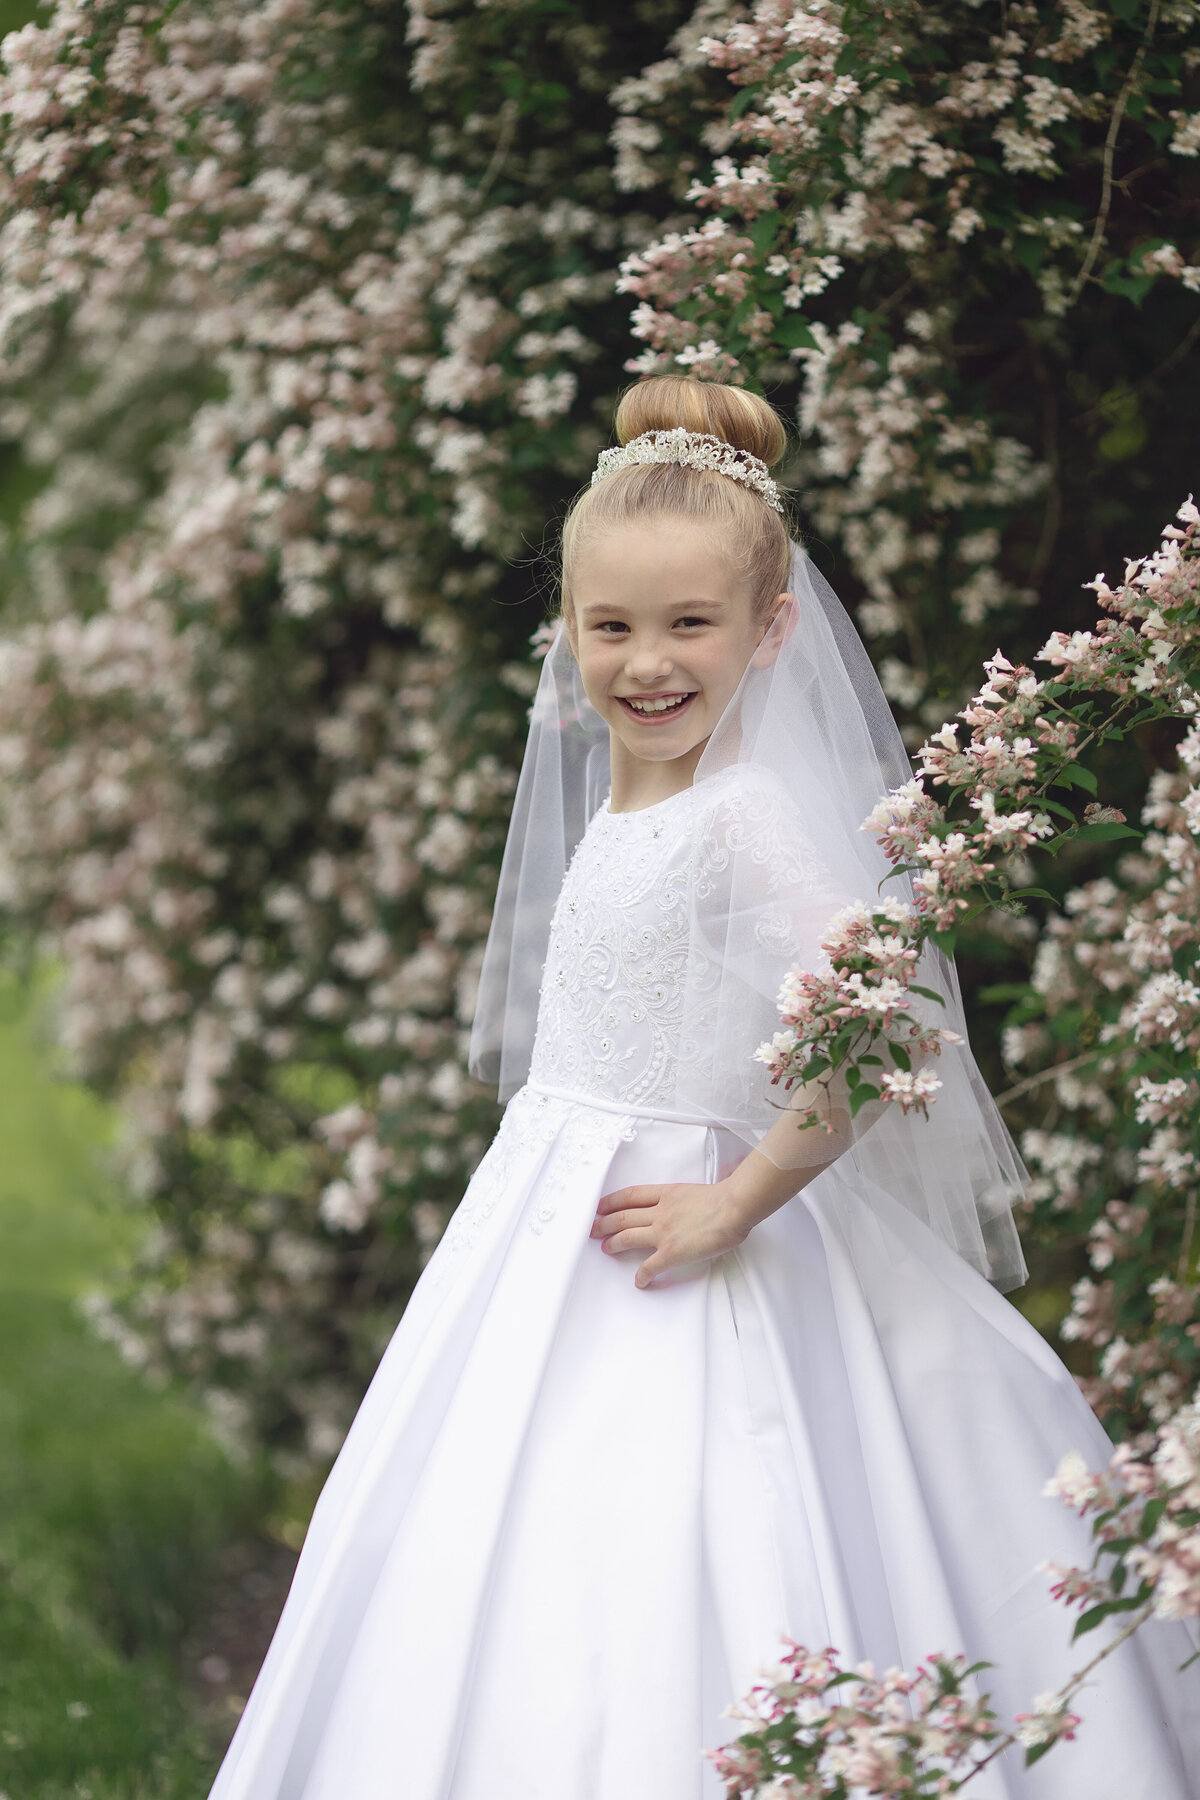 A young blonde girl smiles big with hands on her hips while standing for a New Jersey Communion Portrait Photographer among a white flowering bush